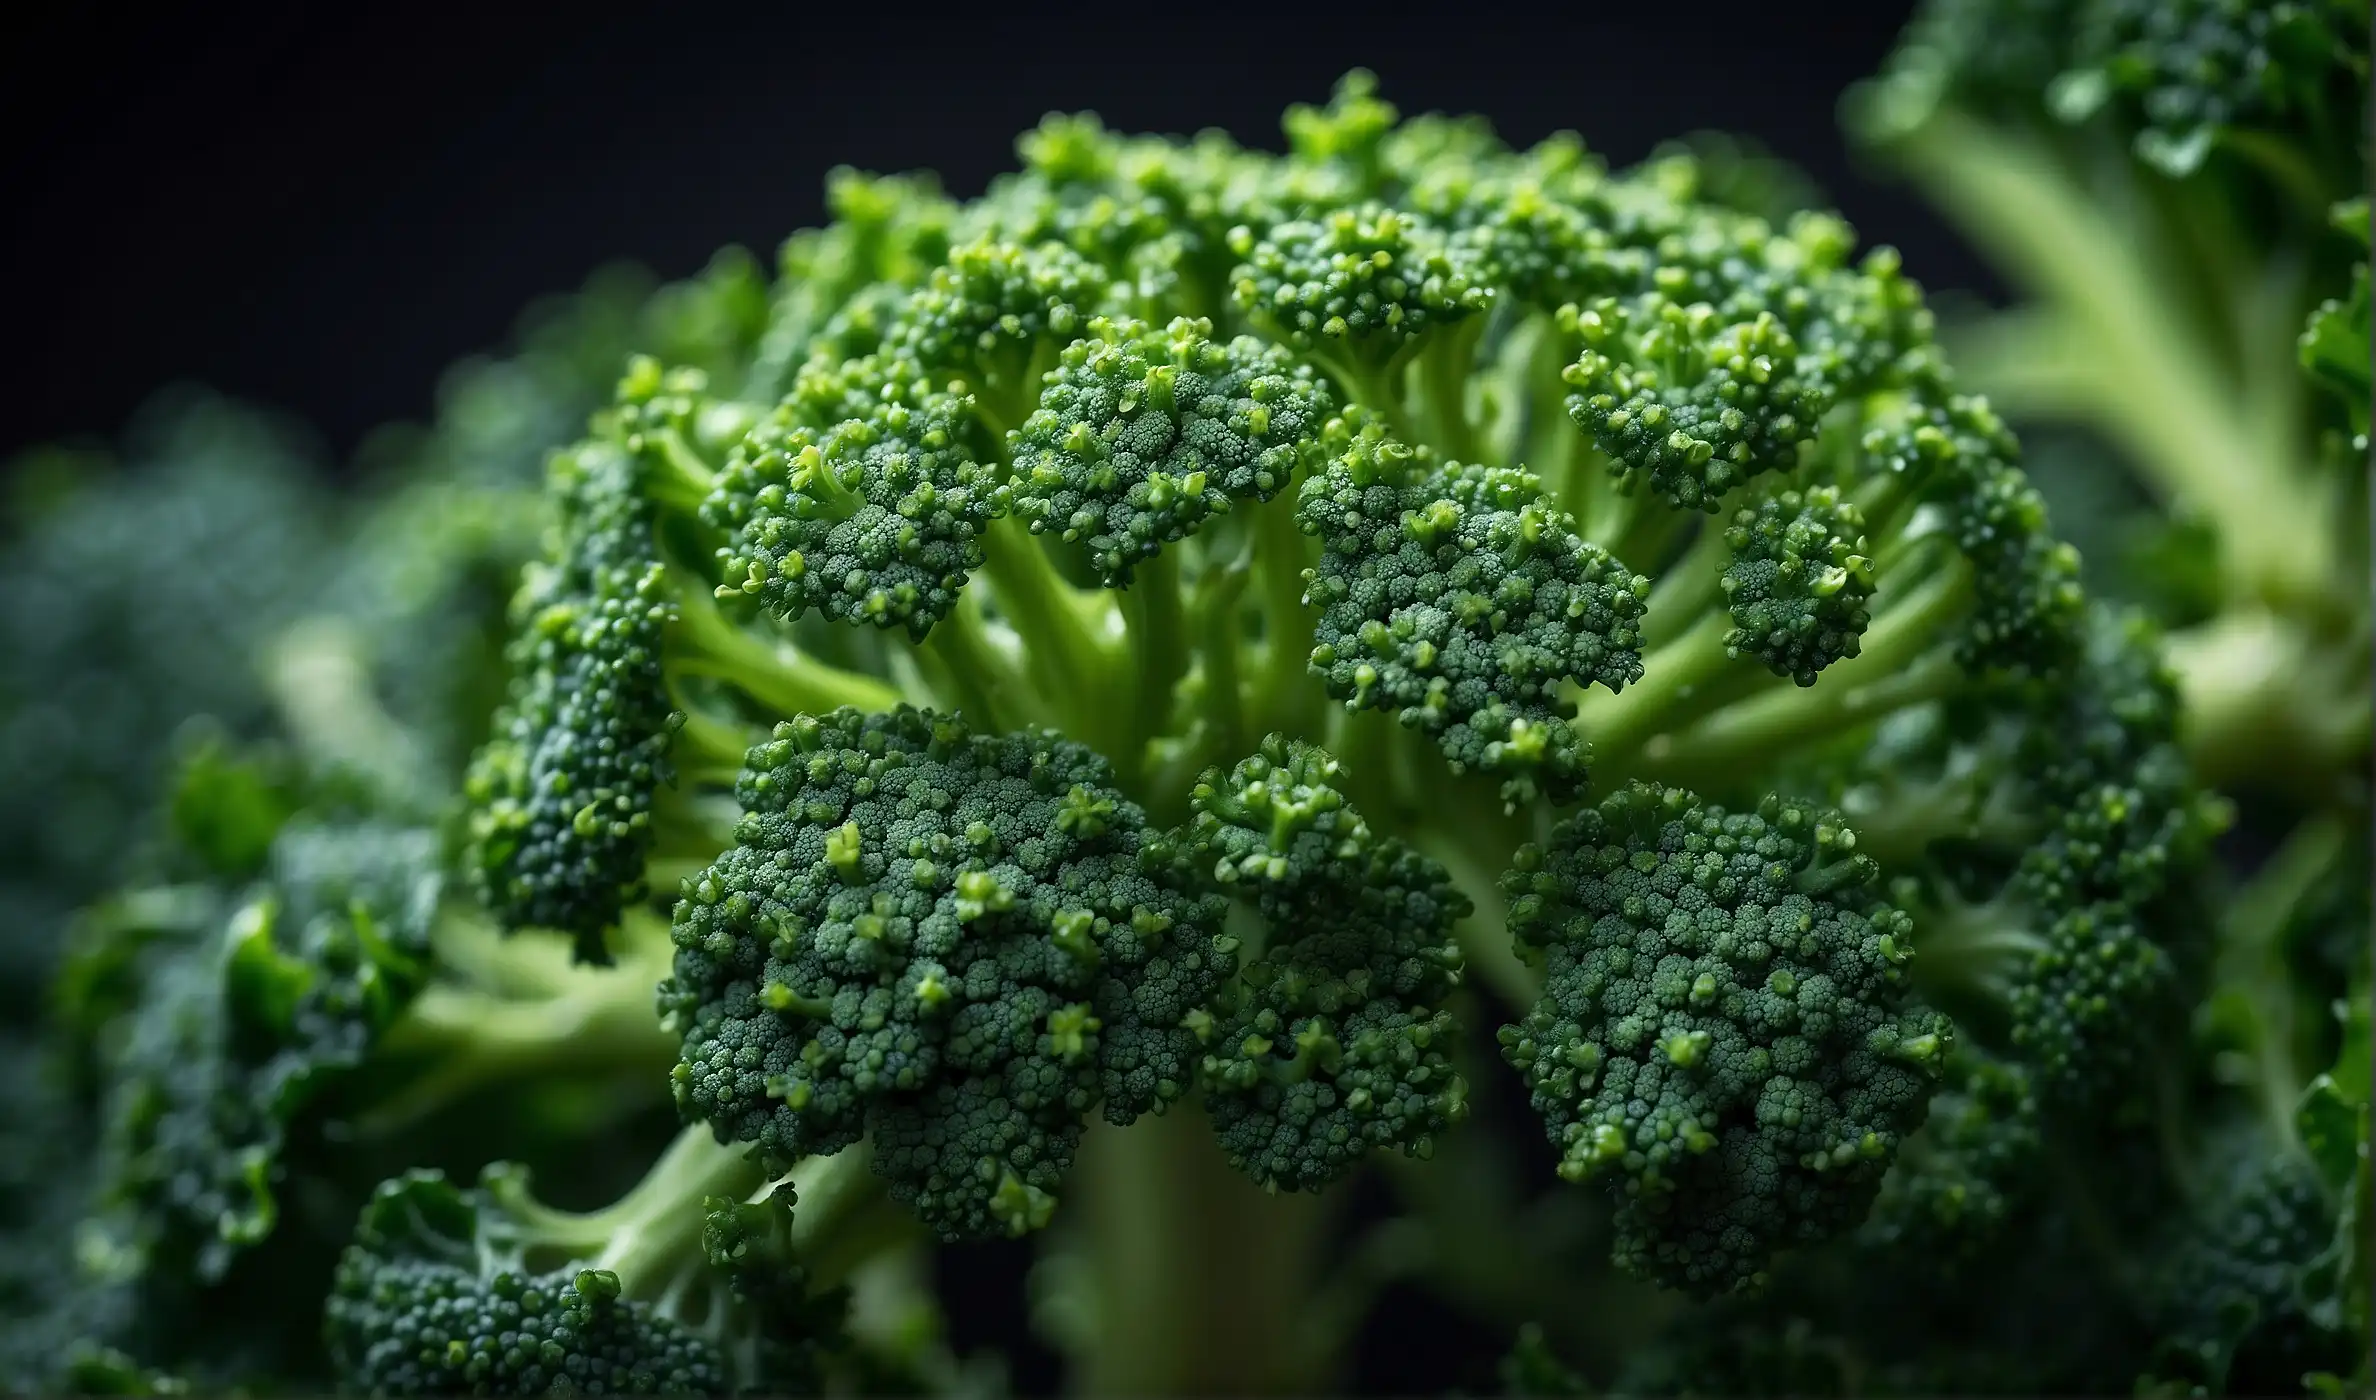 Why Does Broccoli Look Like a Tree? Nature’s Marvel